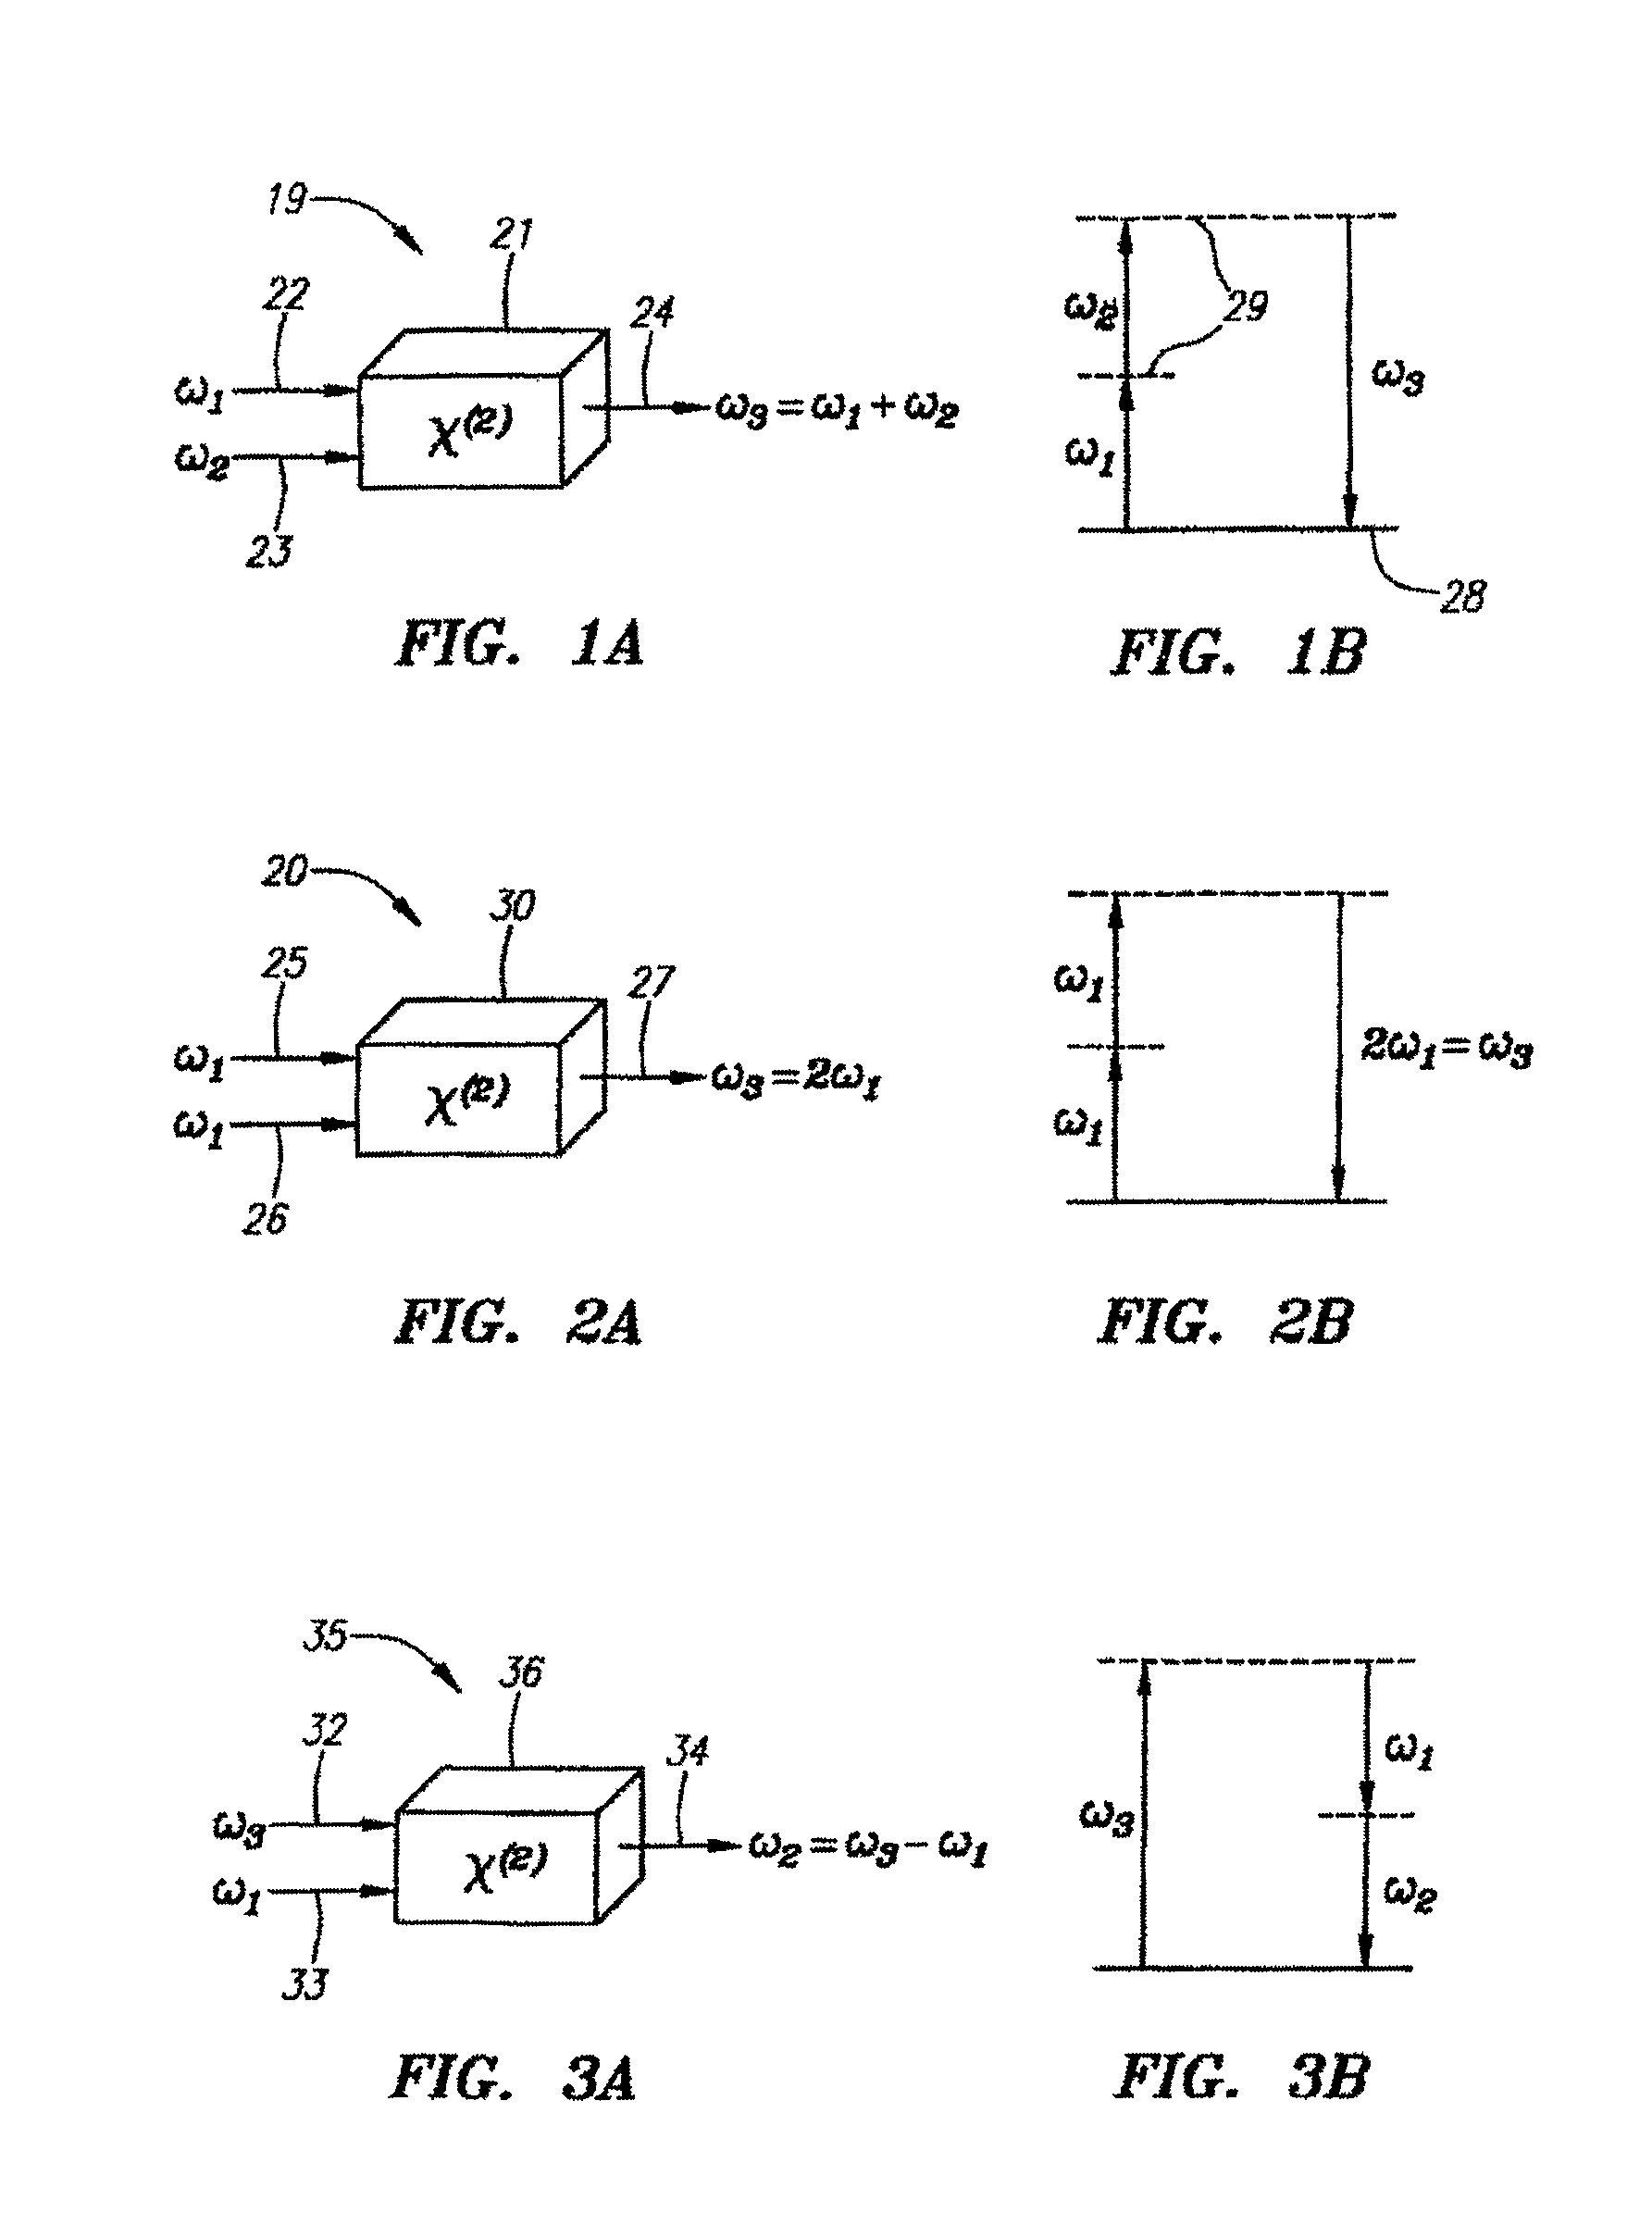 Nonlinear optical device using noncentrosymmetric cubic materials for frequency conversion